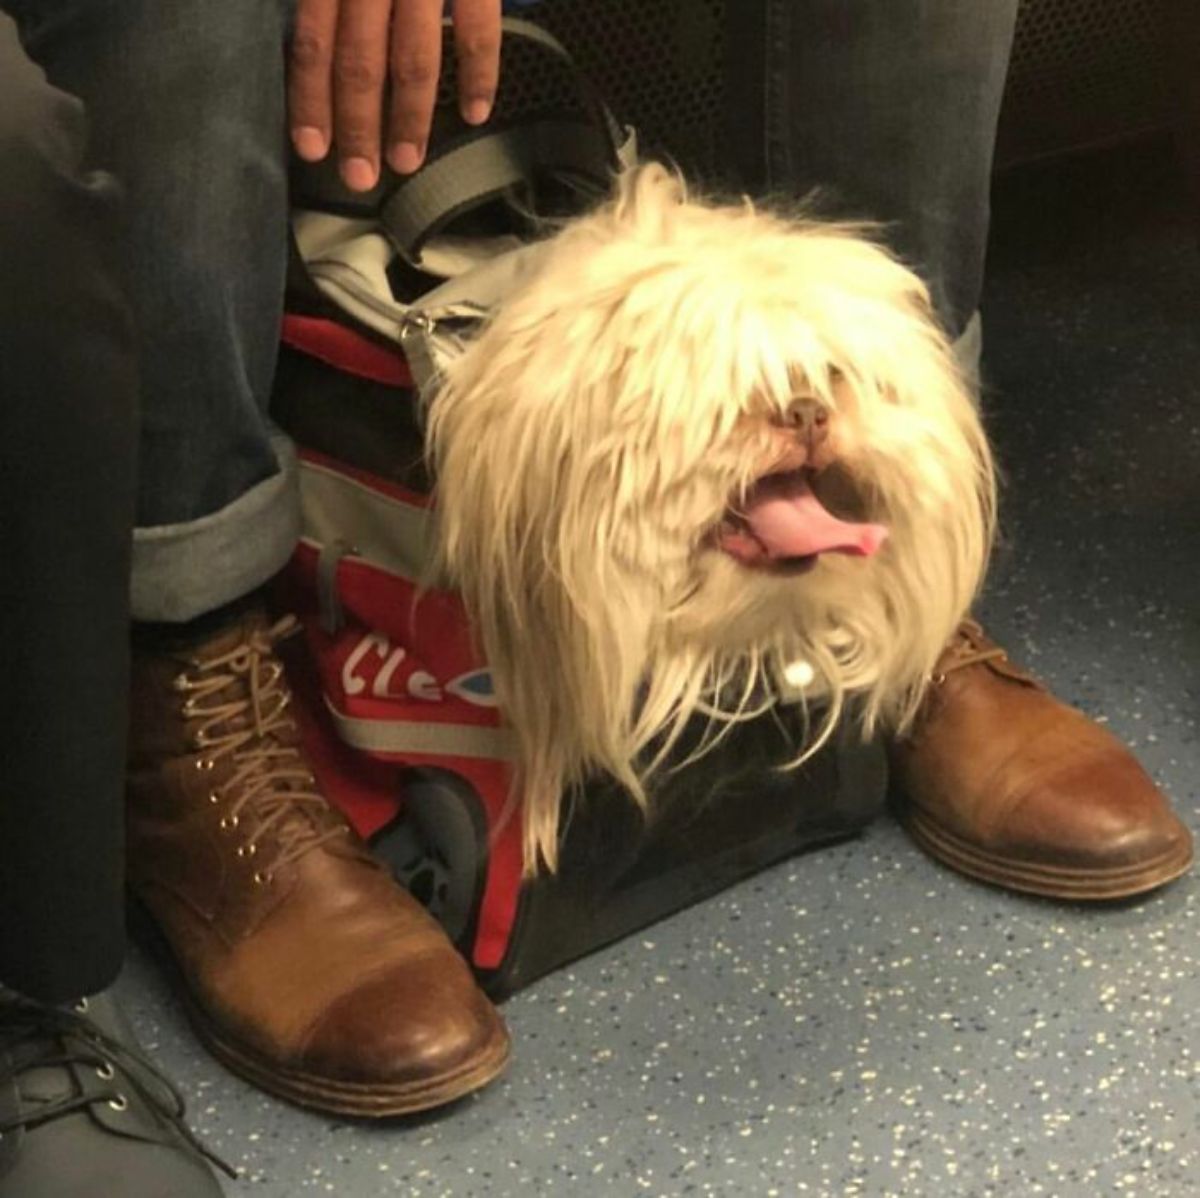 fluffy white dog in a red black and grey zipped bag with the just the head sticking out on the floor between someone's feet